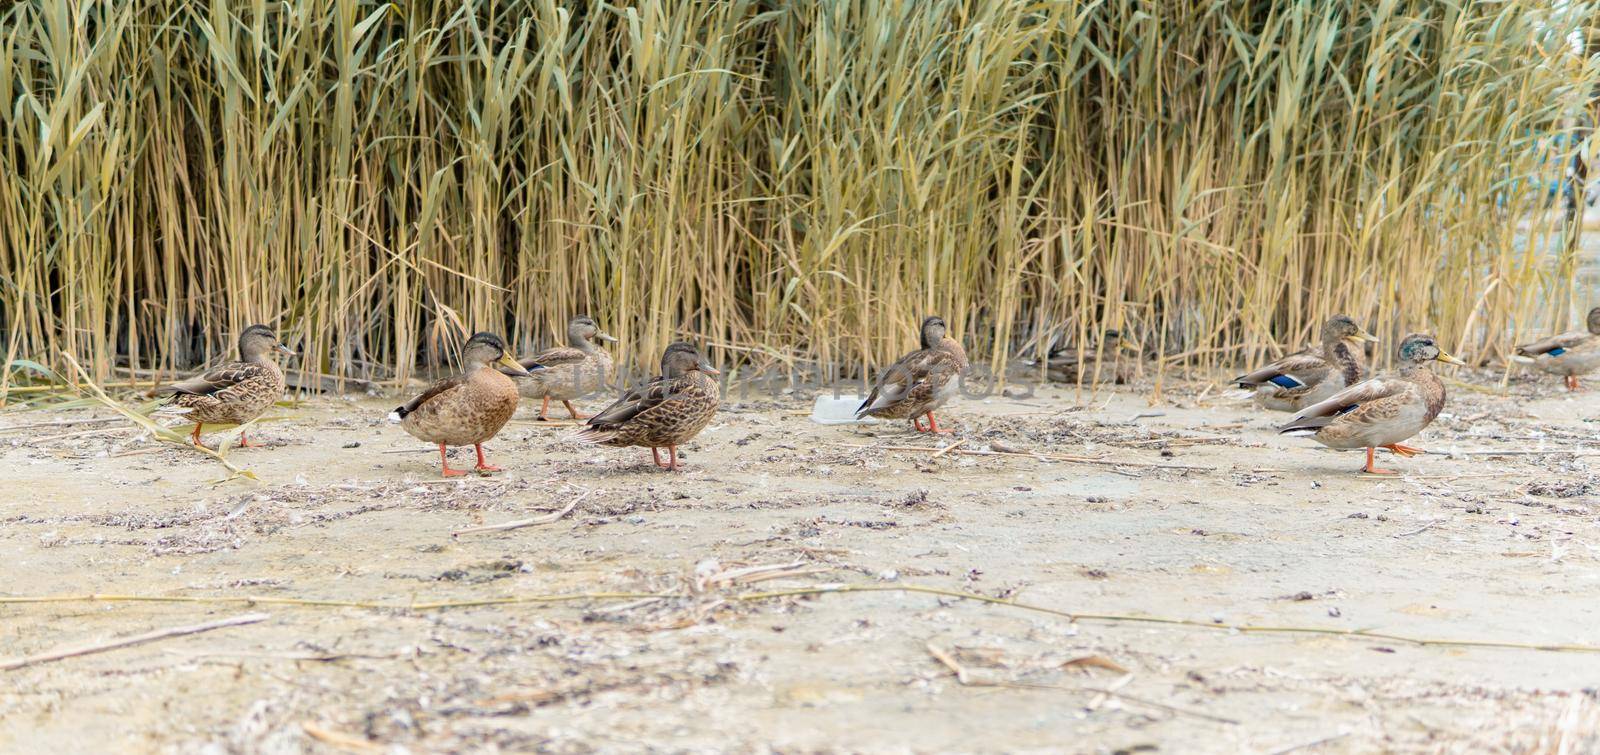 Ducks On The Beach 5 - In The Background Reeds. High quality photo